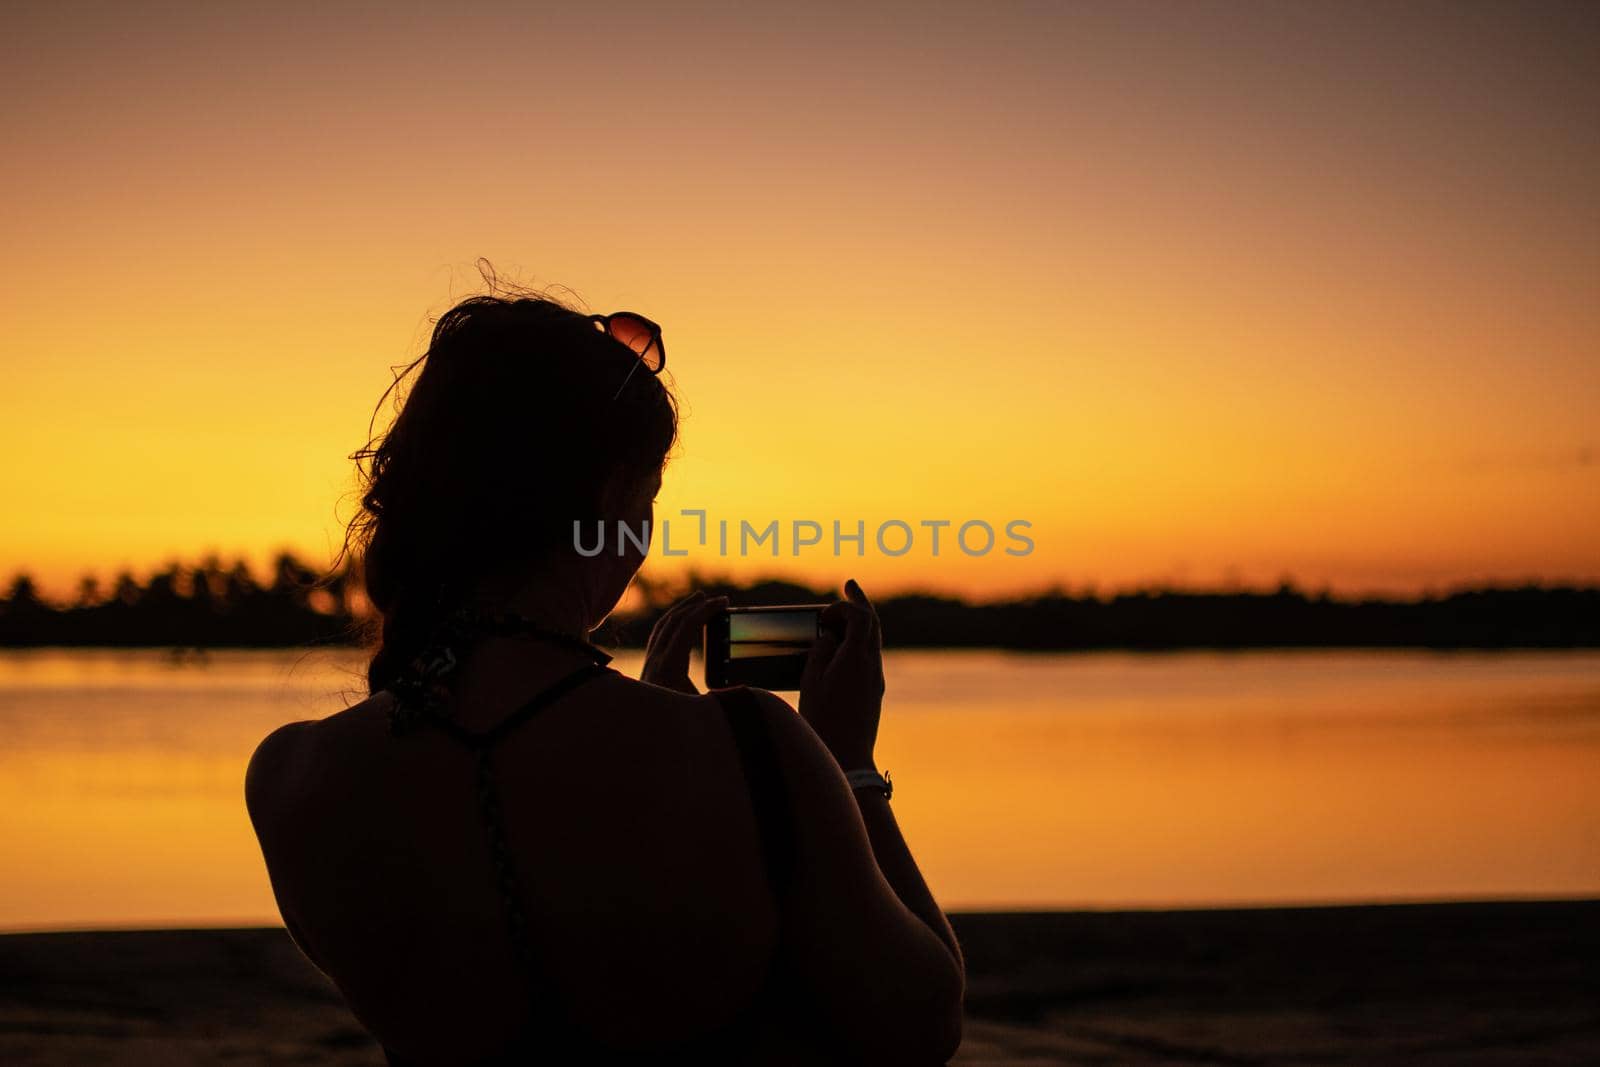 A woman with sunglasses takes a phone photo of the bright orange sunset and reflection near Ngwesaung, Irrawaddy, western Myanmar